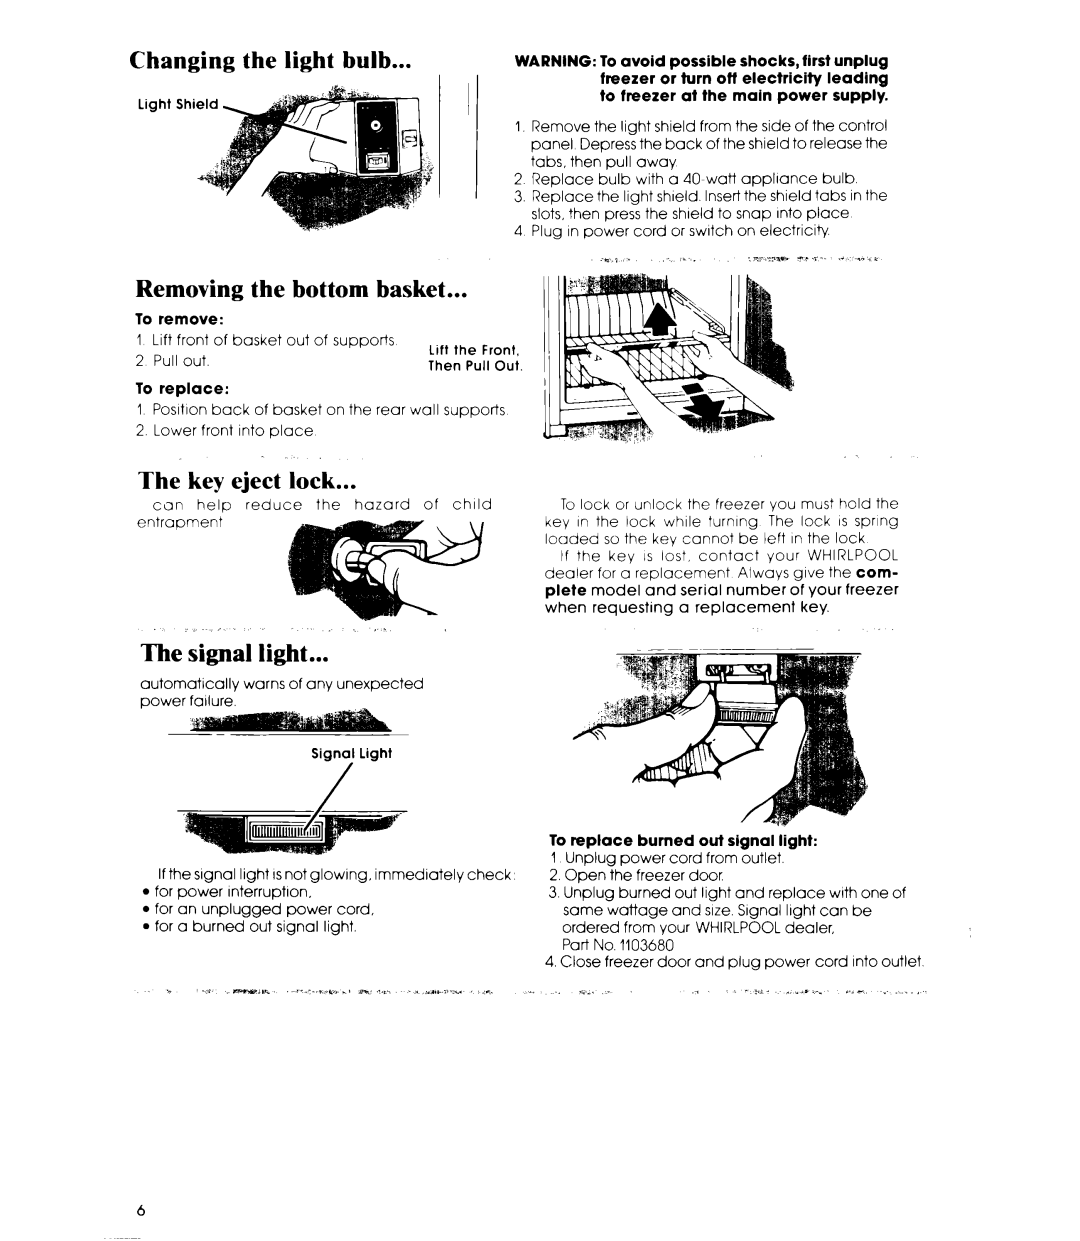 Whirlpool EVISHEXP manual Changing the light bulb, Removing the bottom basket, The key eject lock, The signal light 